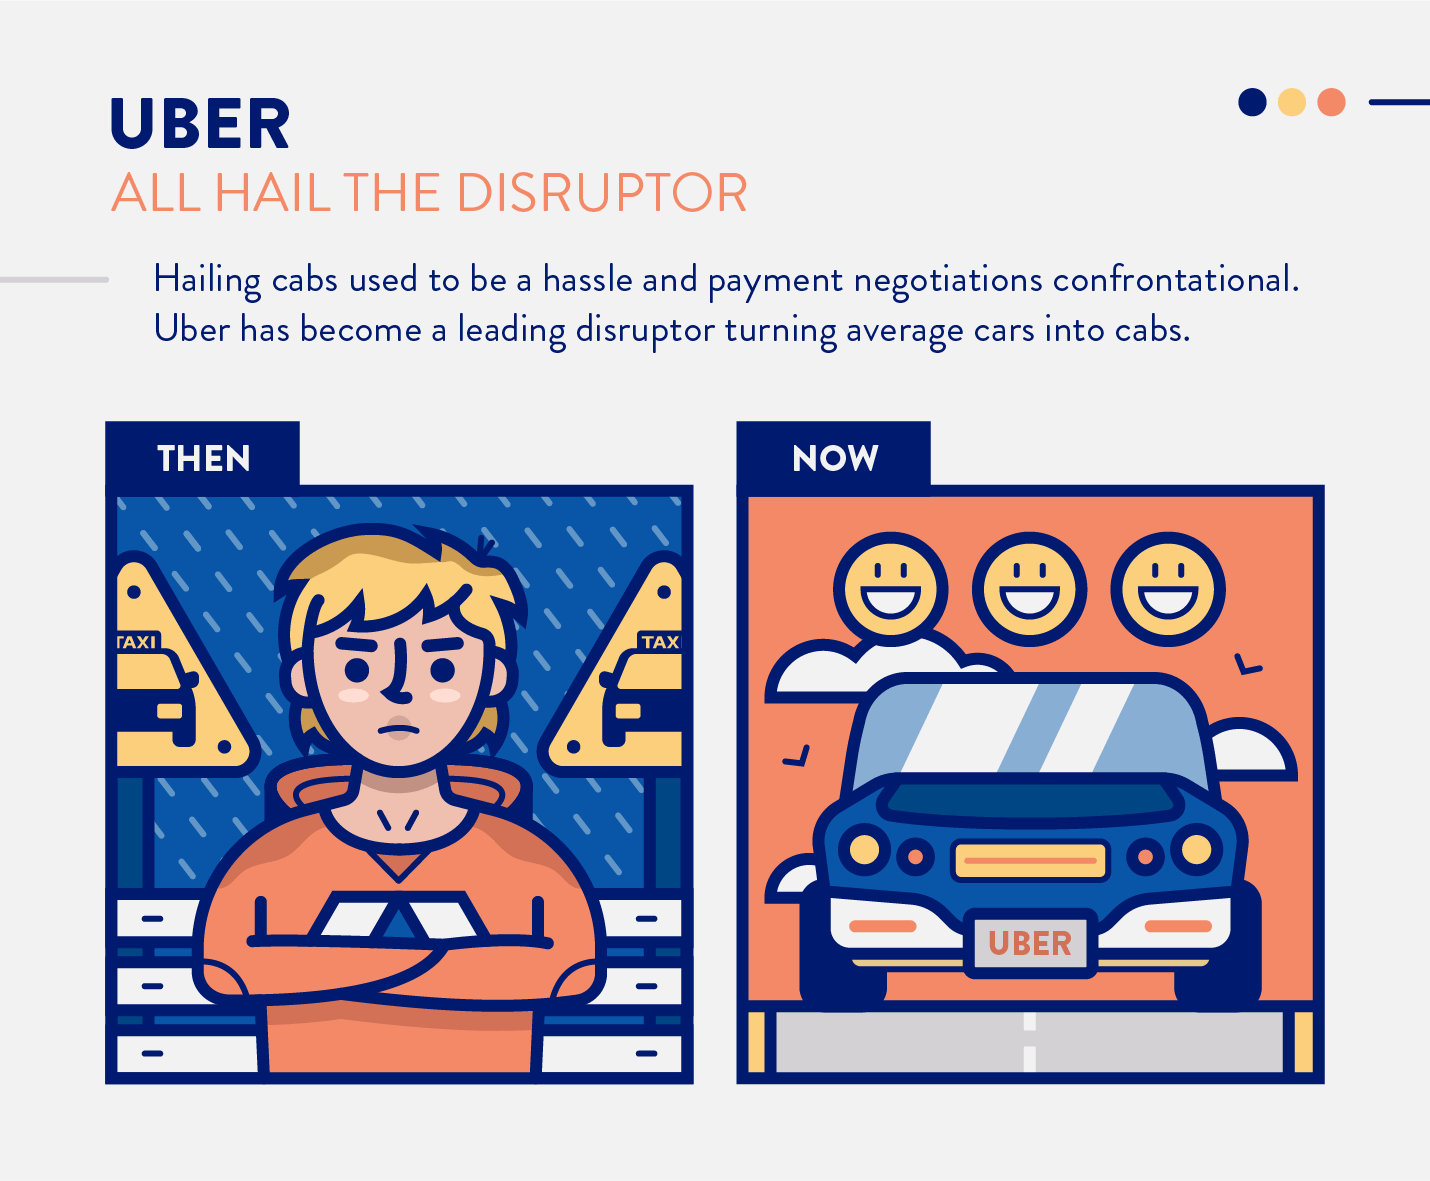 How uber disrupted taxis of the past and improved the user experience